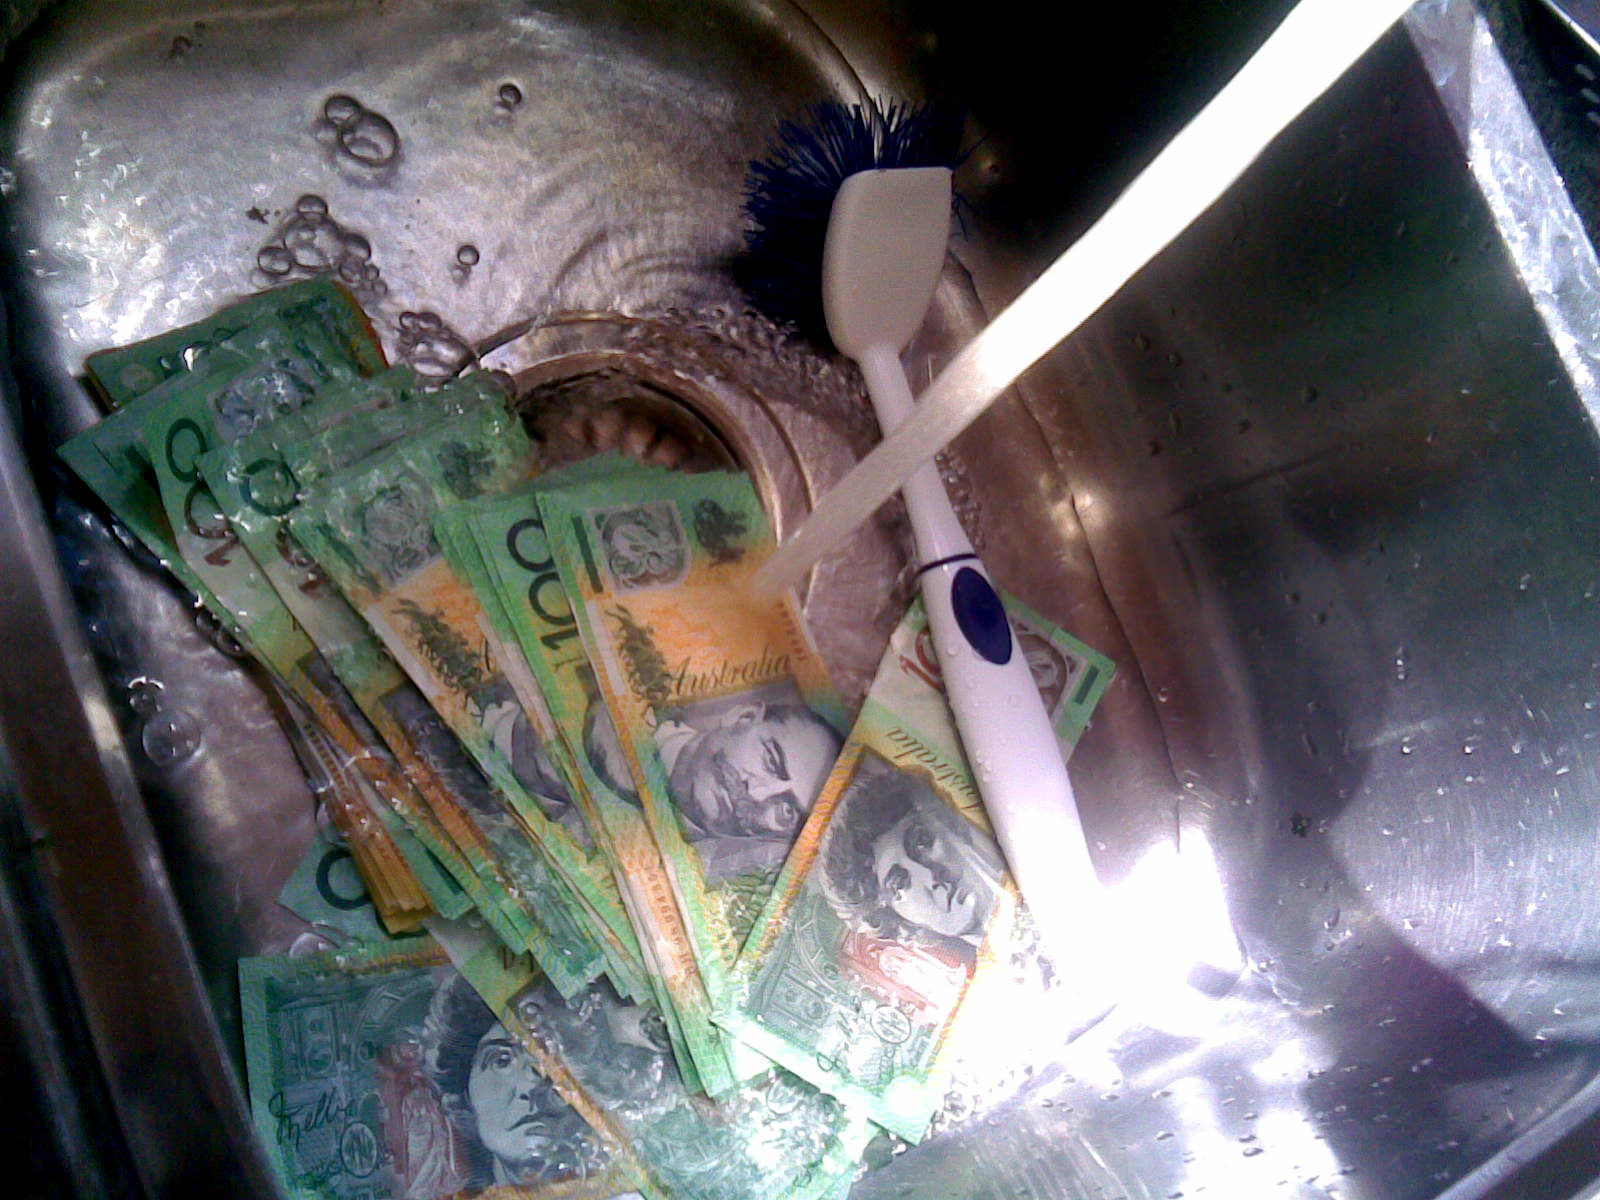 there are many money sitting in the sink with a toothbrush